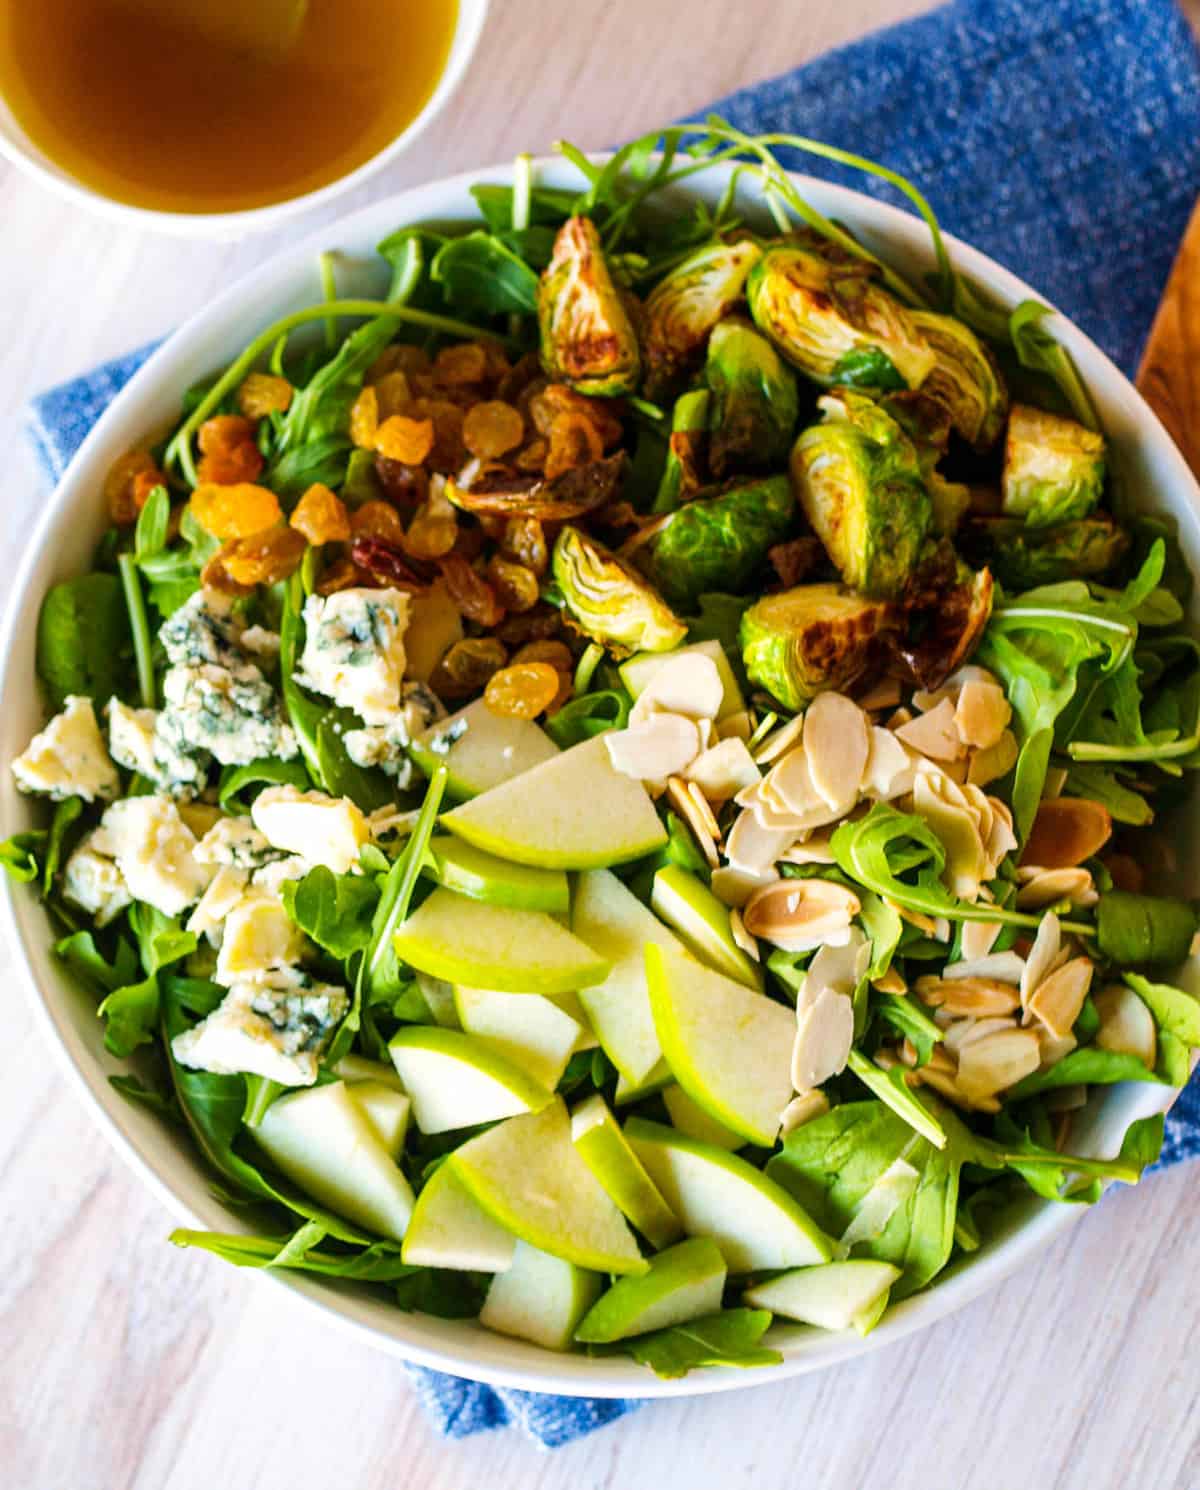 An overhead shot of a large bowl of brussels sprouts and arugula salad